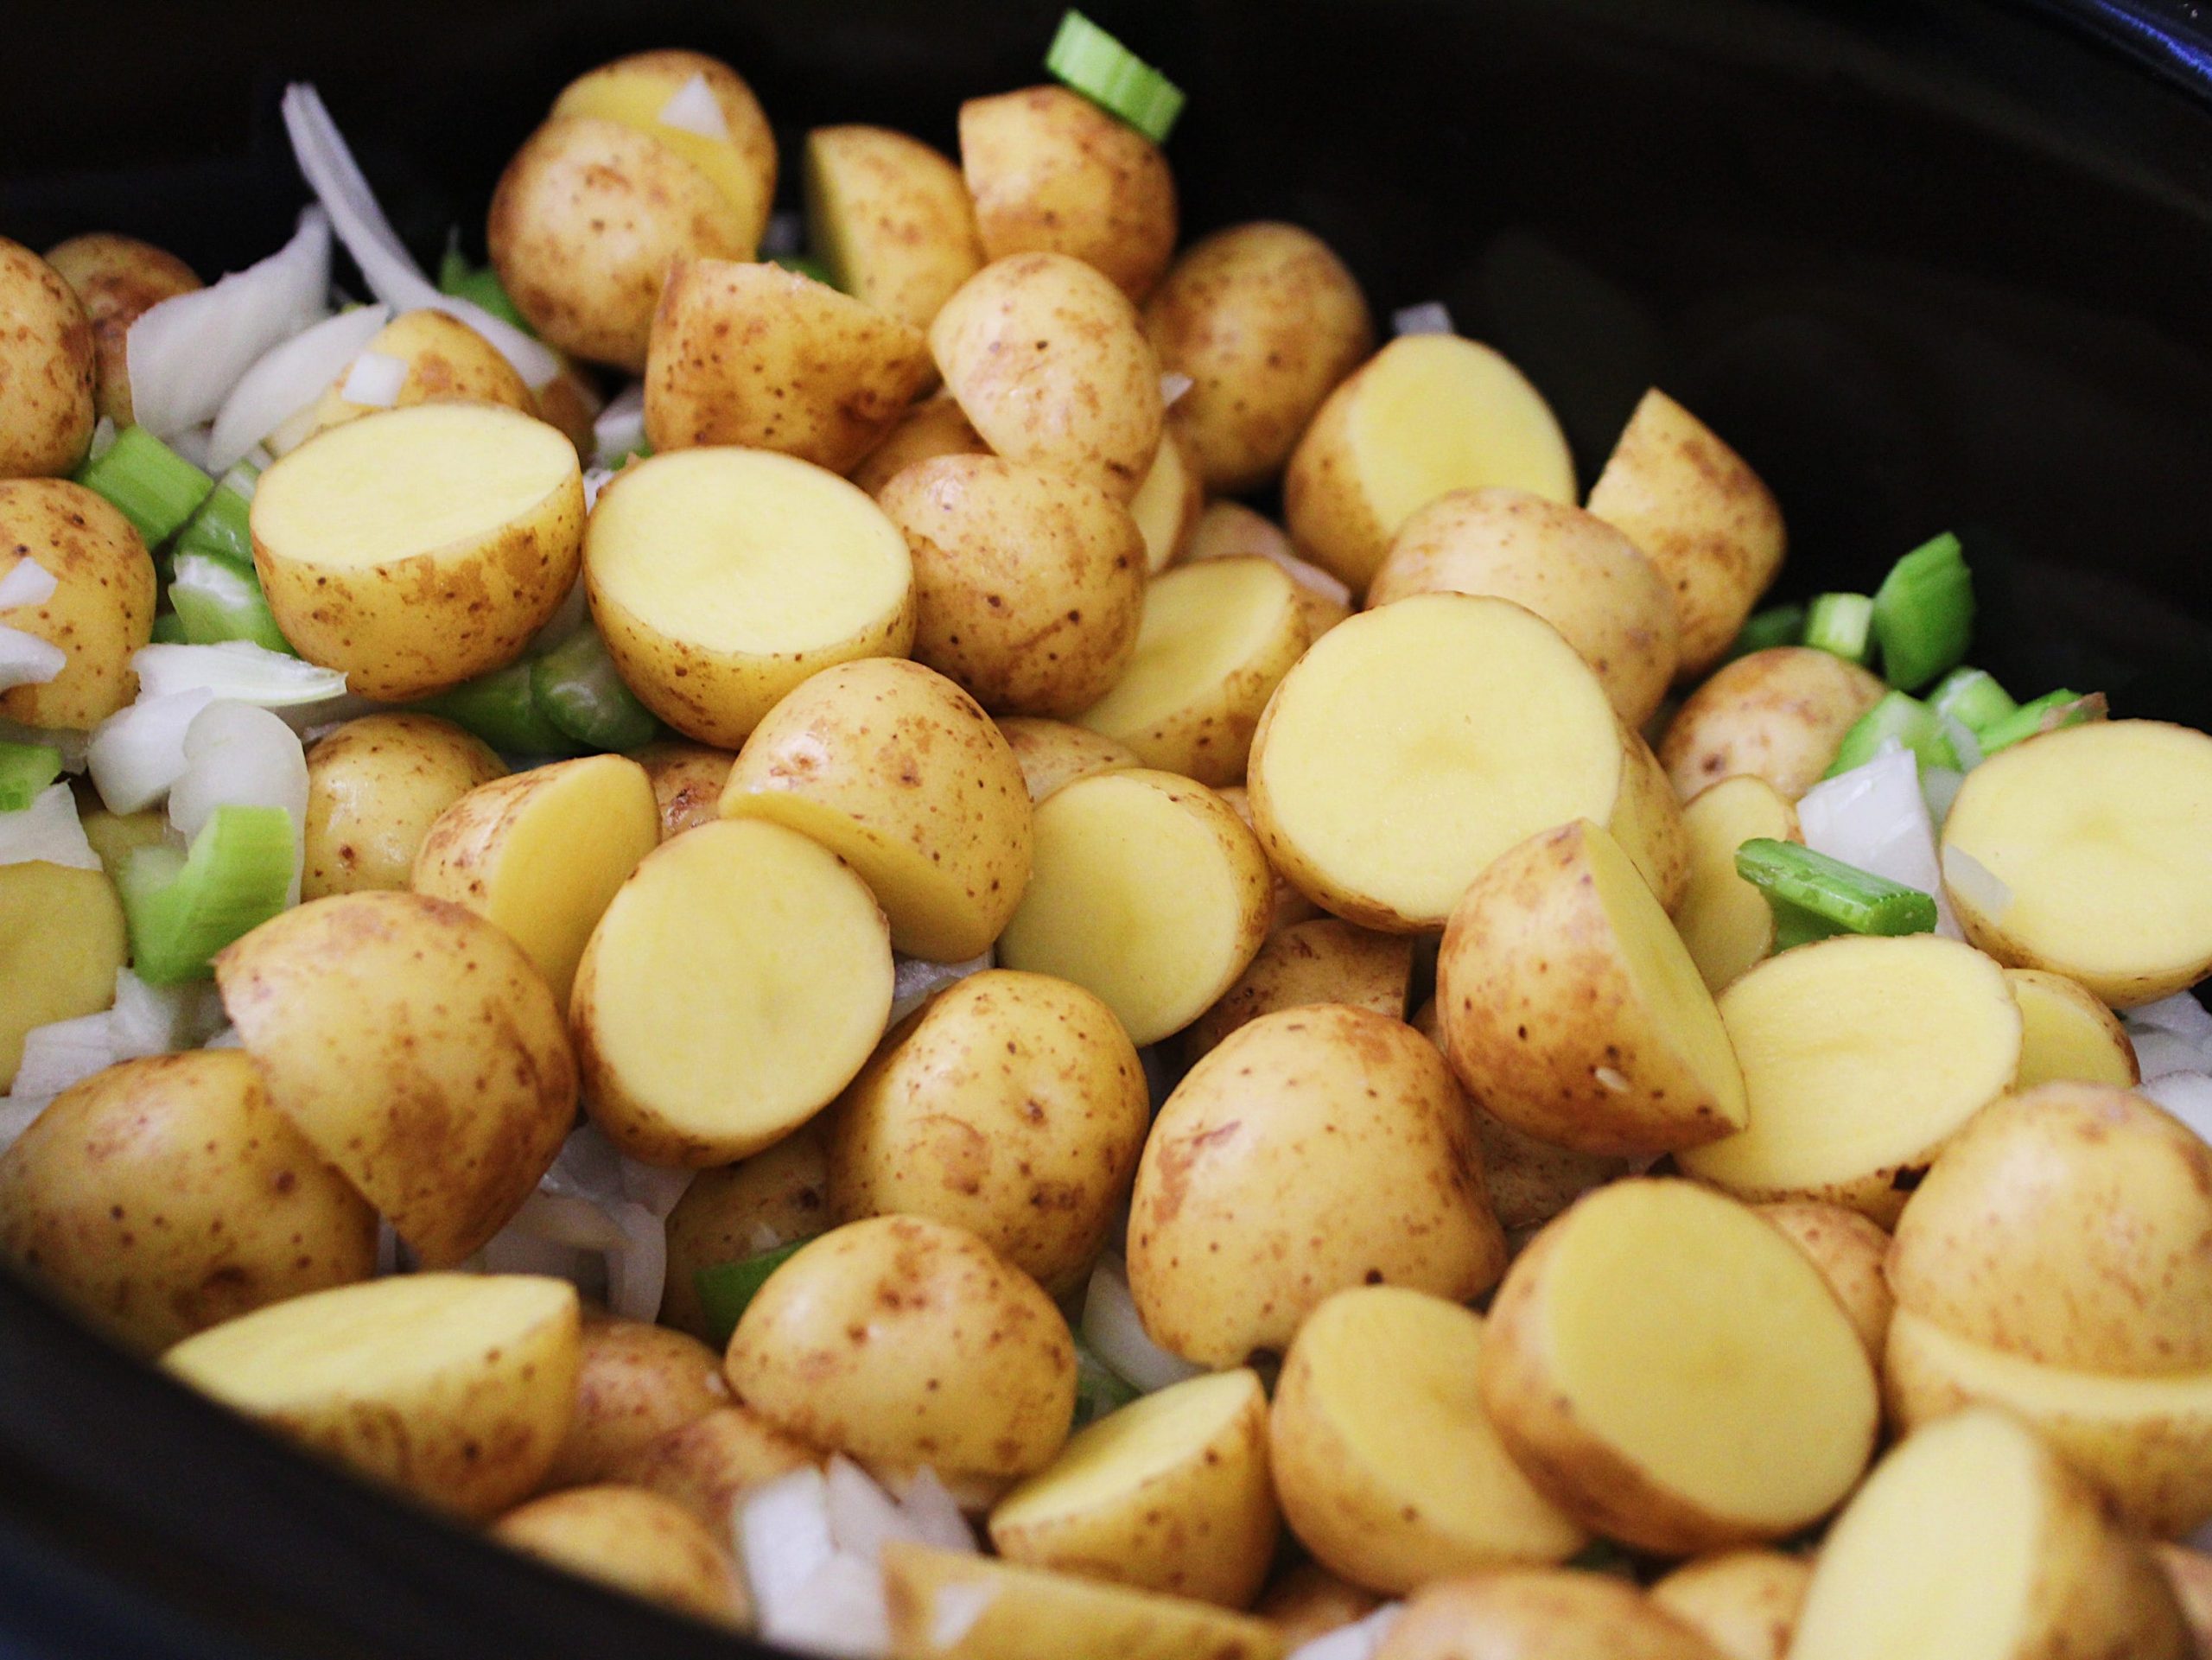 chopped potatoes celery and onions in a black slow cooker